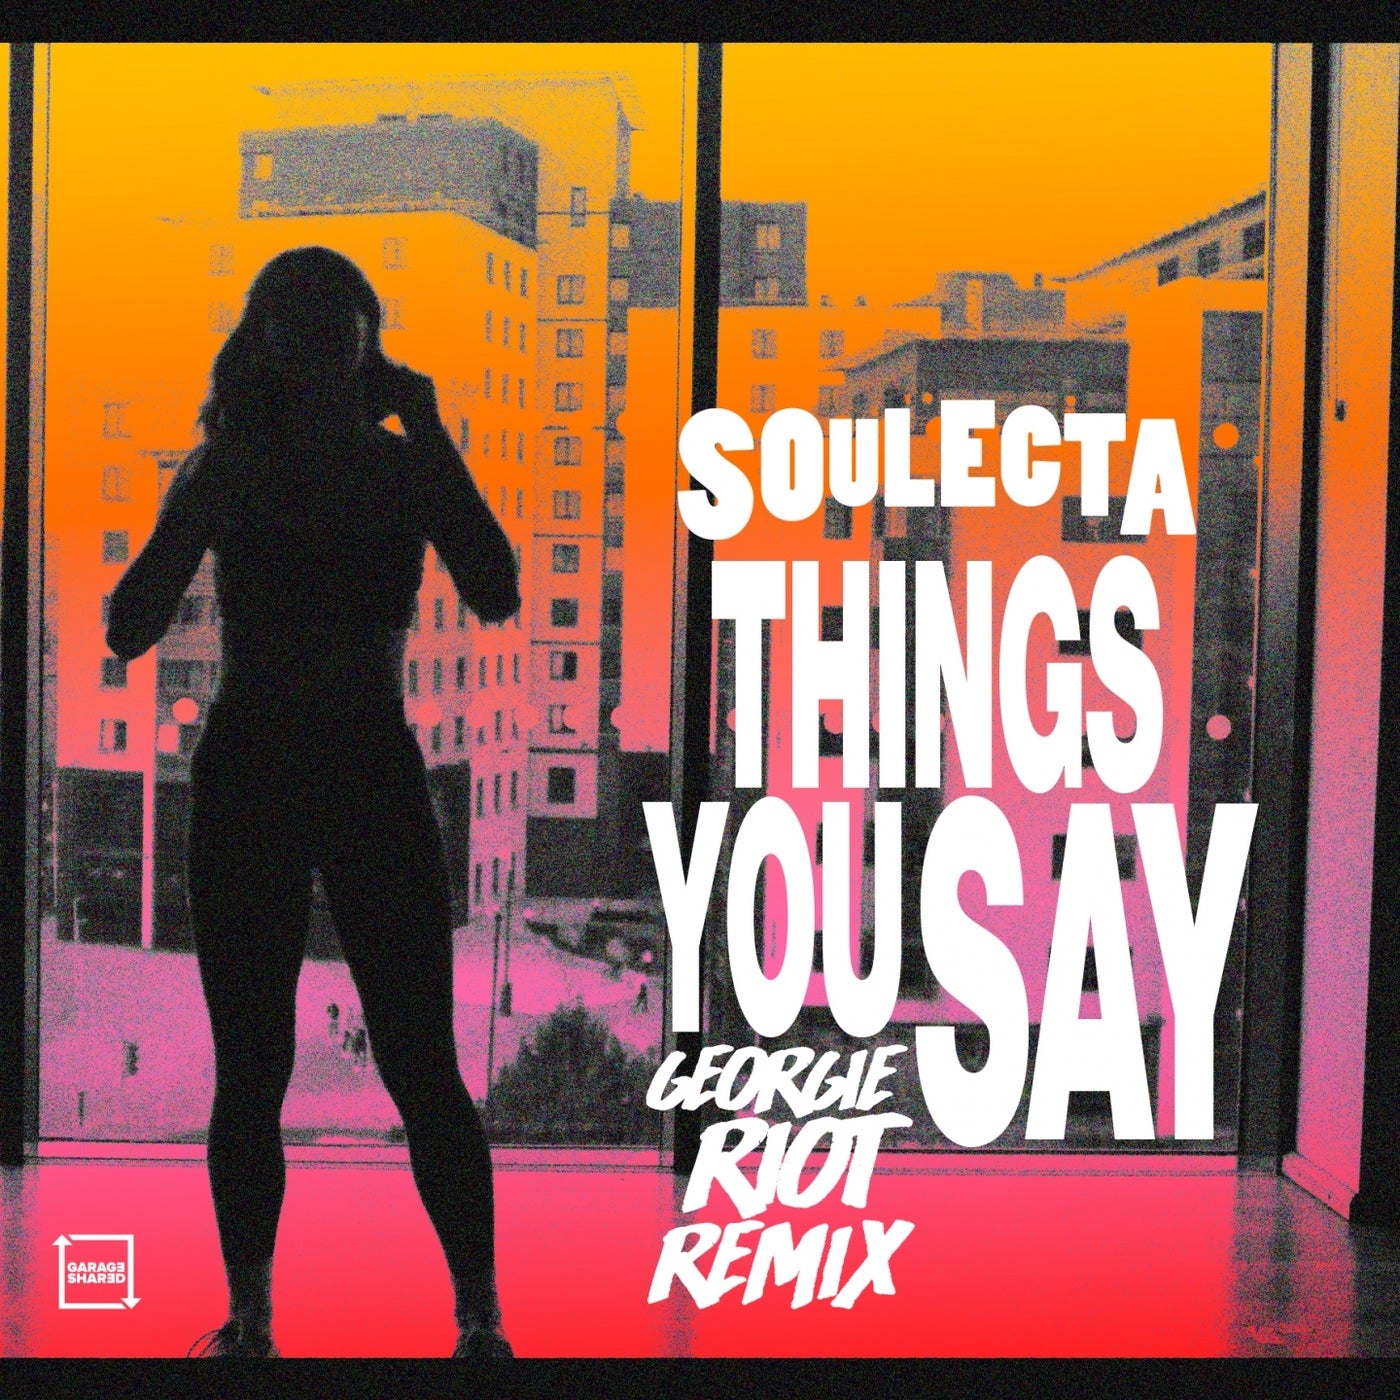 Things You Say (Georgie Riot Remix)